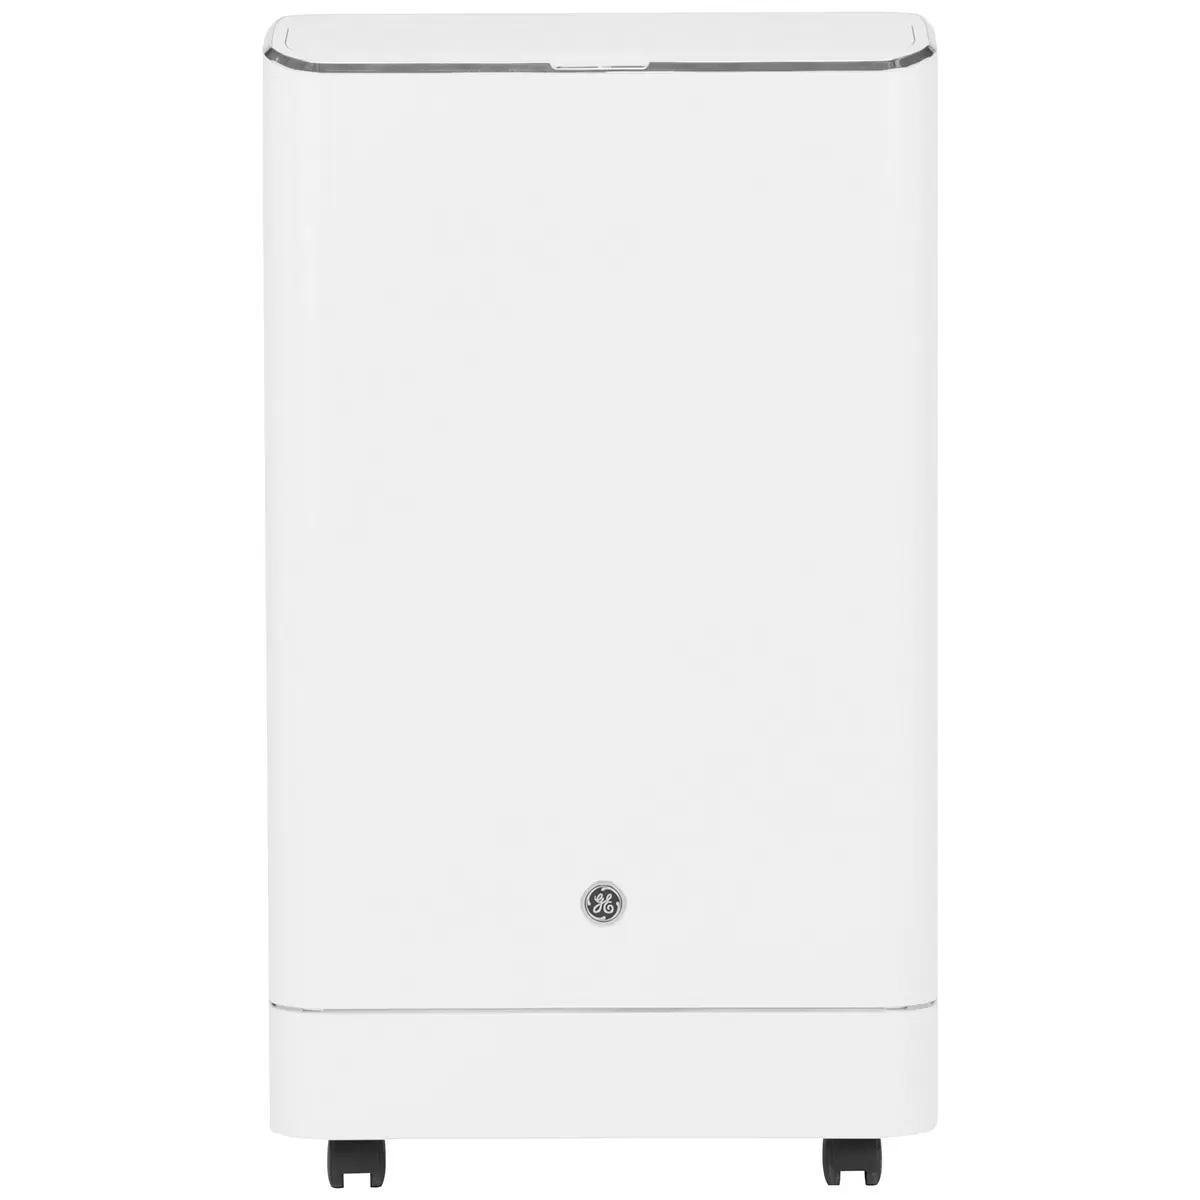 GE 13500BTU Portable Air Conditioner for $449.99 Shipped